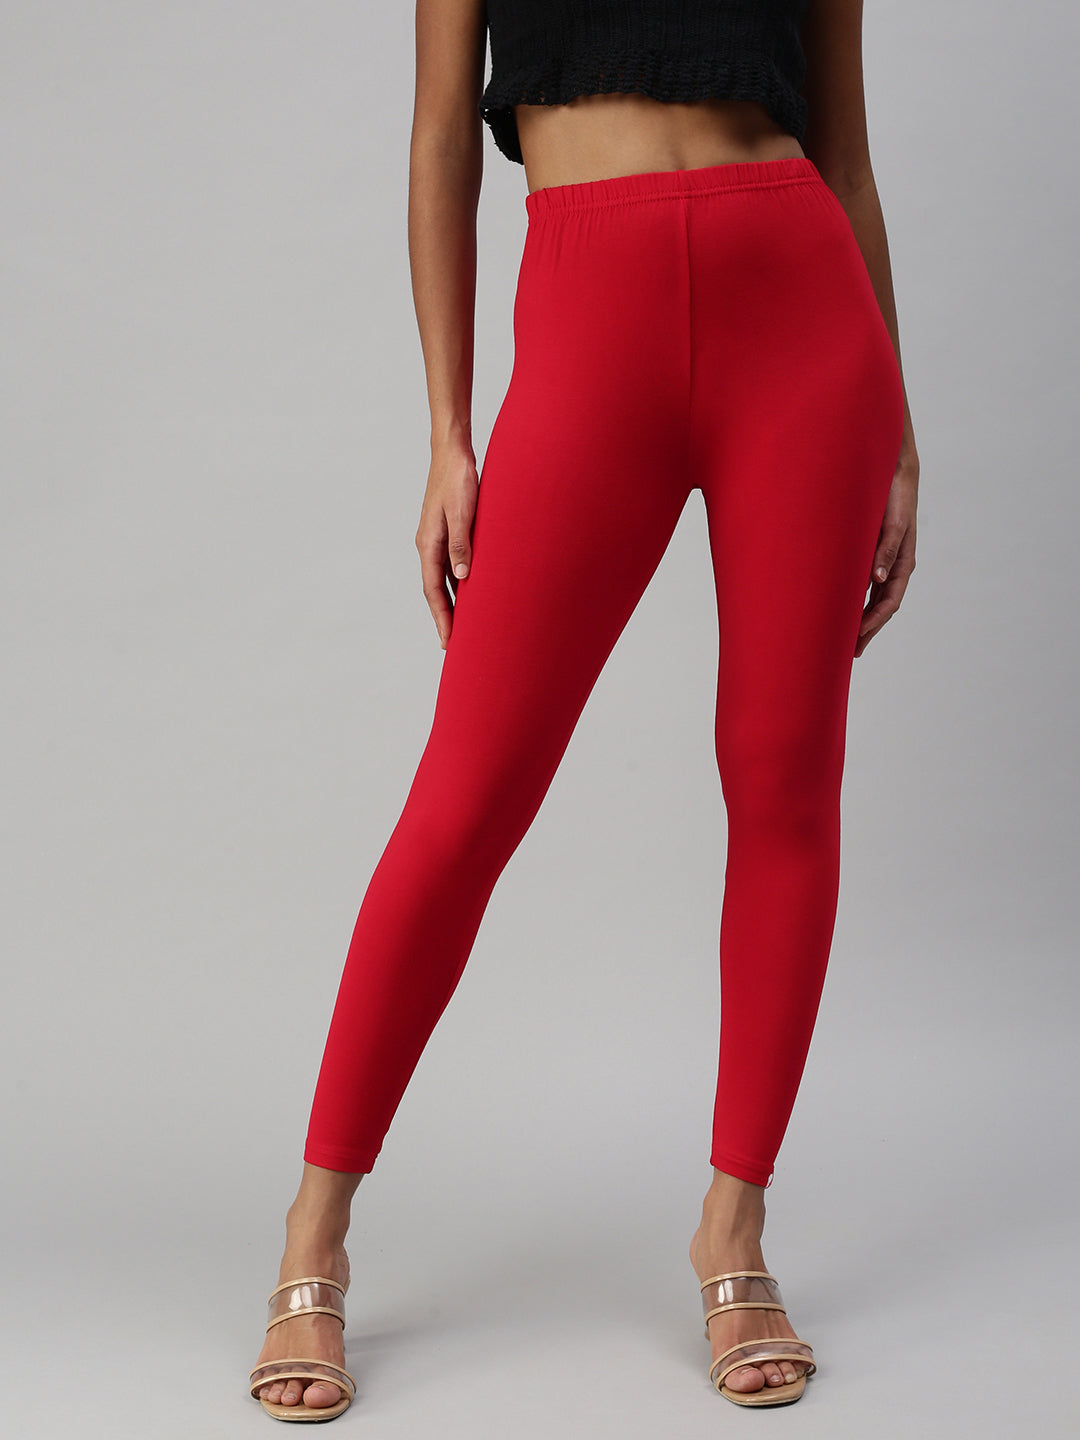 Shop Prisma's Apple Red Ankle Leggings for Stylish Comfort